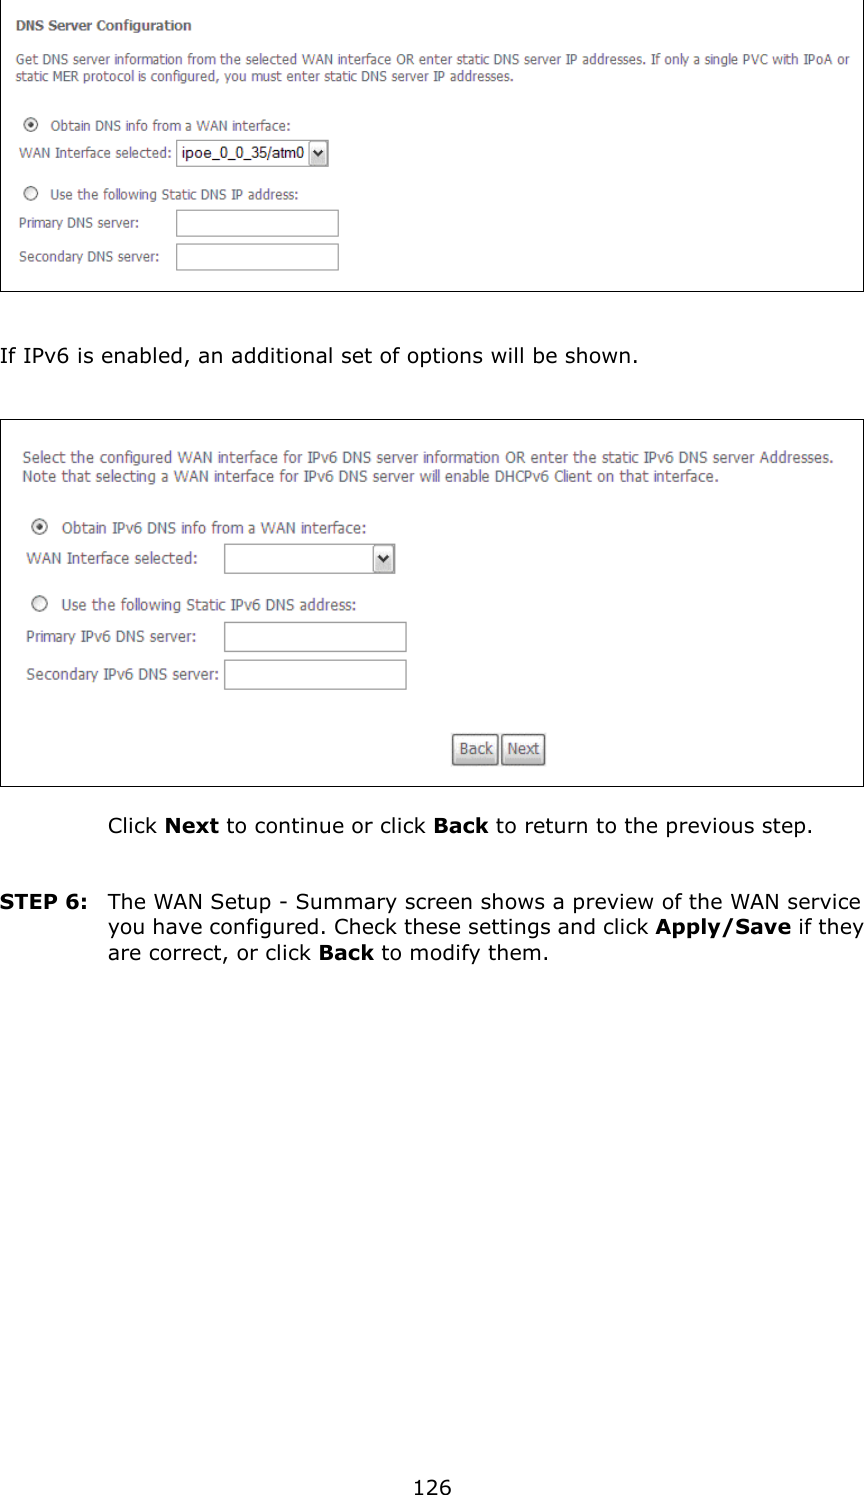   126      If IPv6 is enabled, an additional set of options will be shown.       Click Next to continue or click Back to return to the previous step.   STEP 6:  The WAN Setup - Summary screen shows a preview of the WAN service you have configured. Check these settings and click Apply/Save if they are correct, or click Back to modify them.  